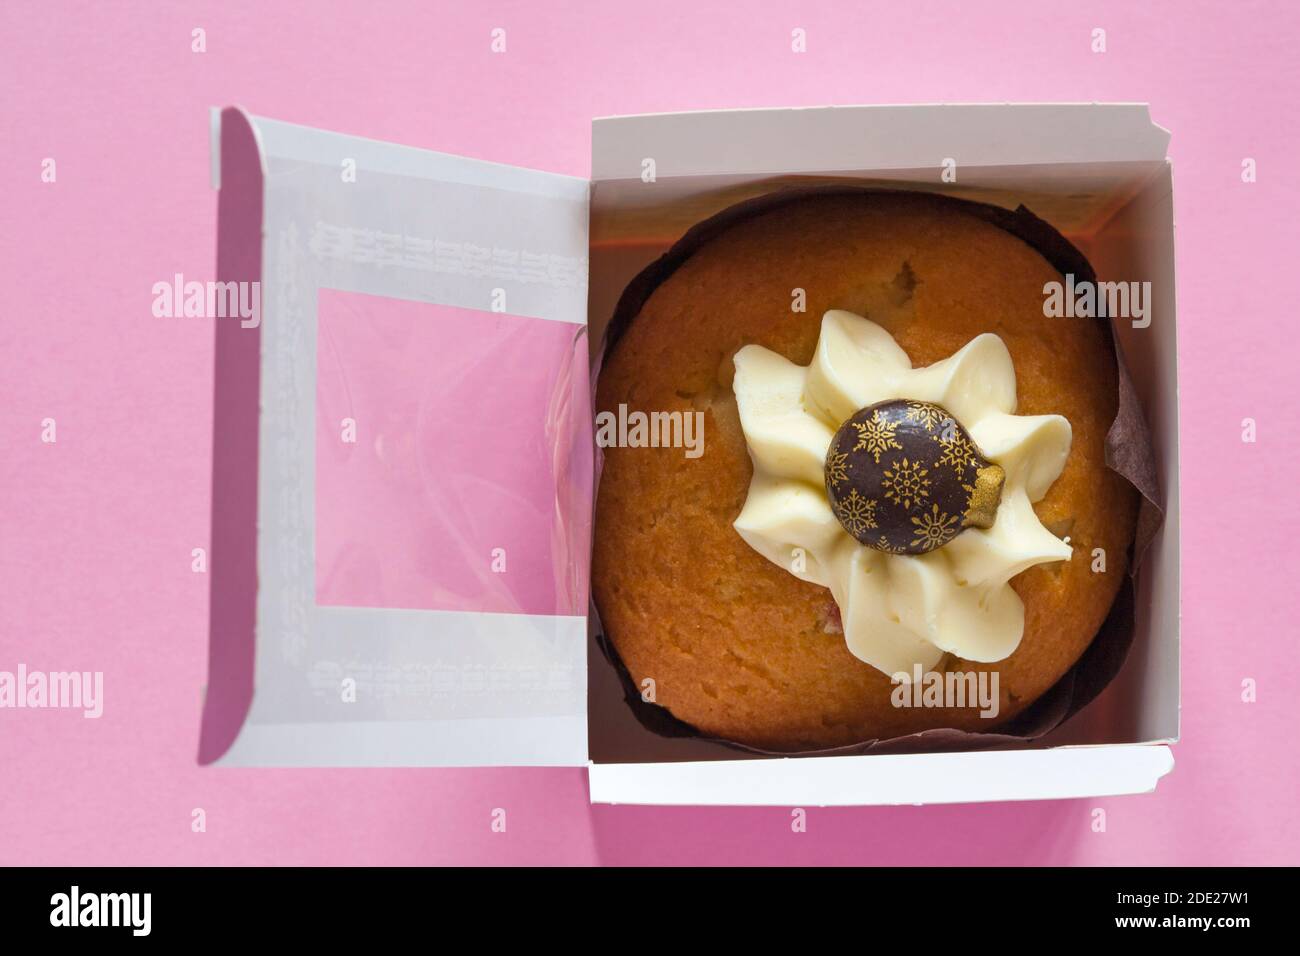 Christmas bauble muffin cake from M&S in-store bakery in box with lid open isolated on pink background - Bauble Victoria Sponge Muffin Stock Photo